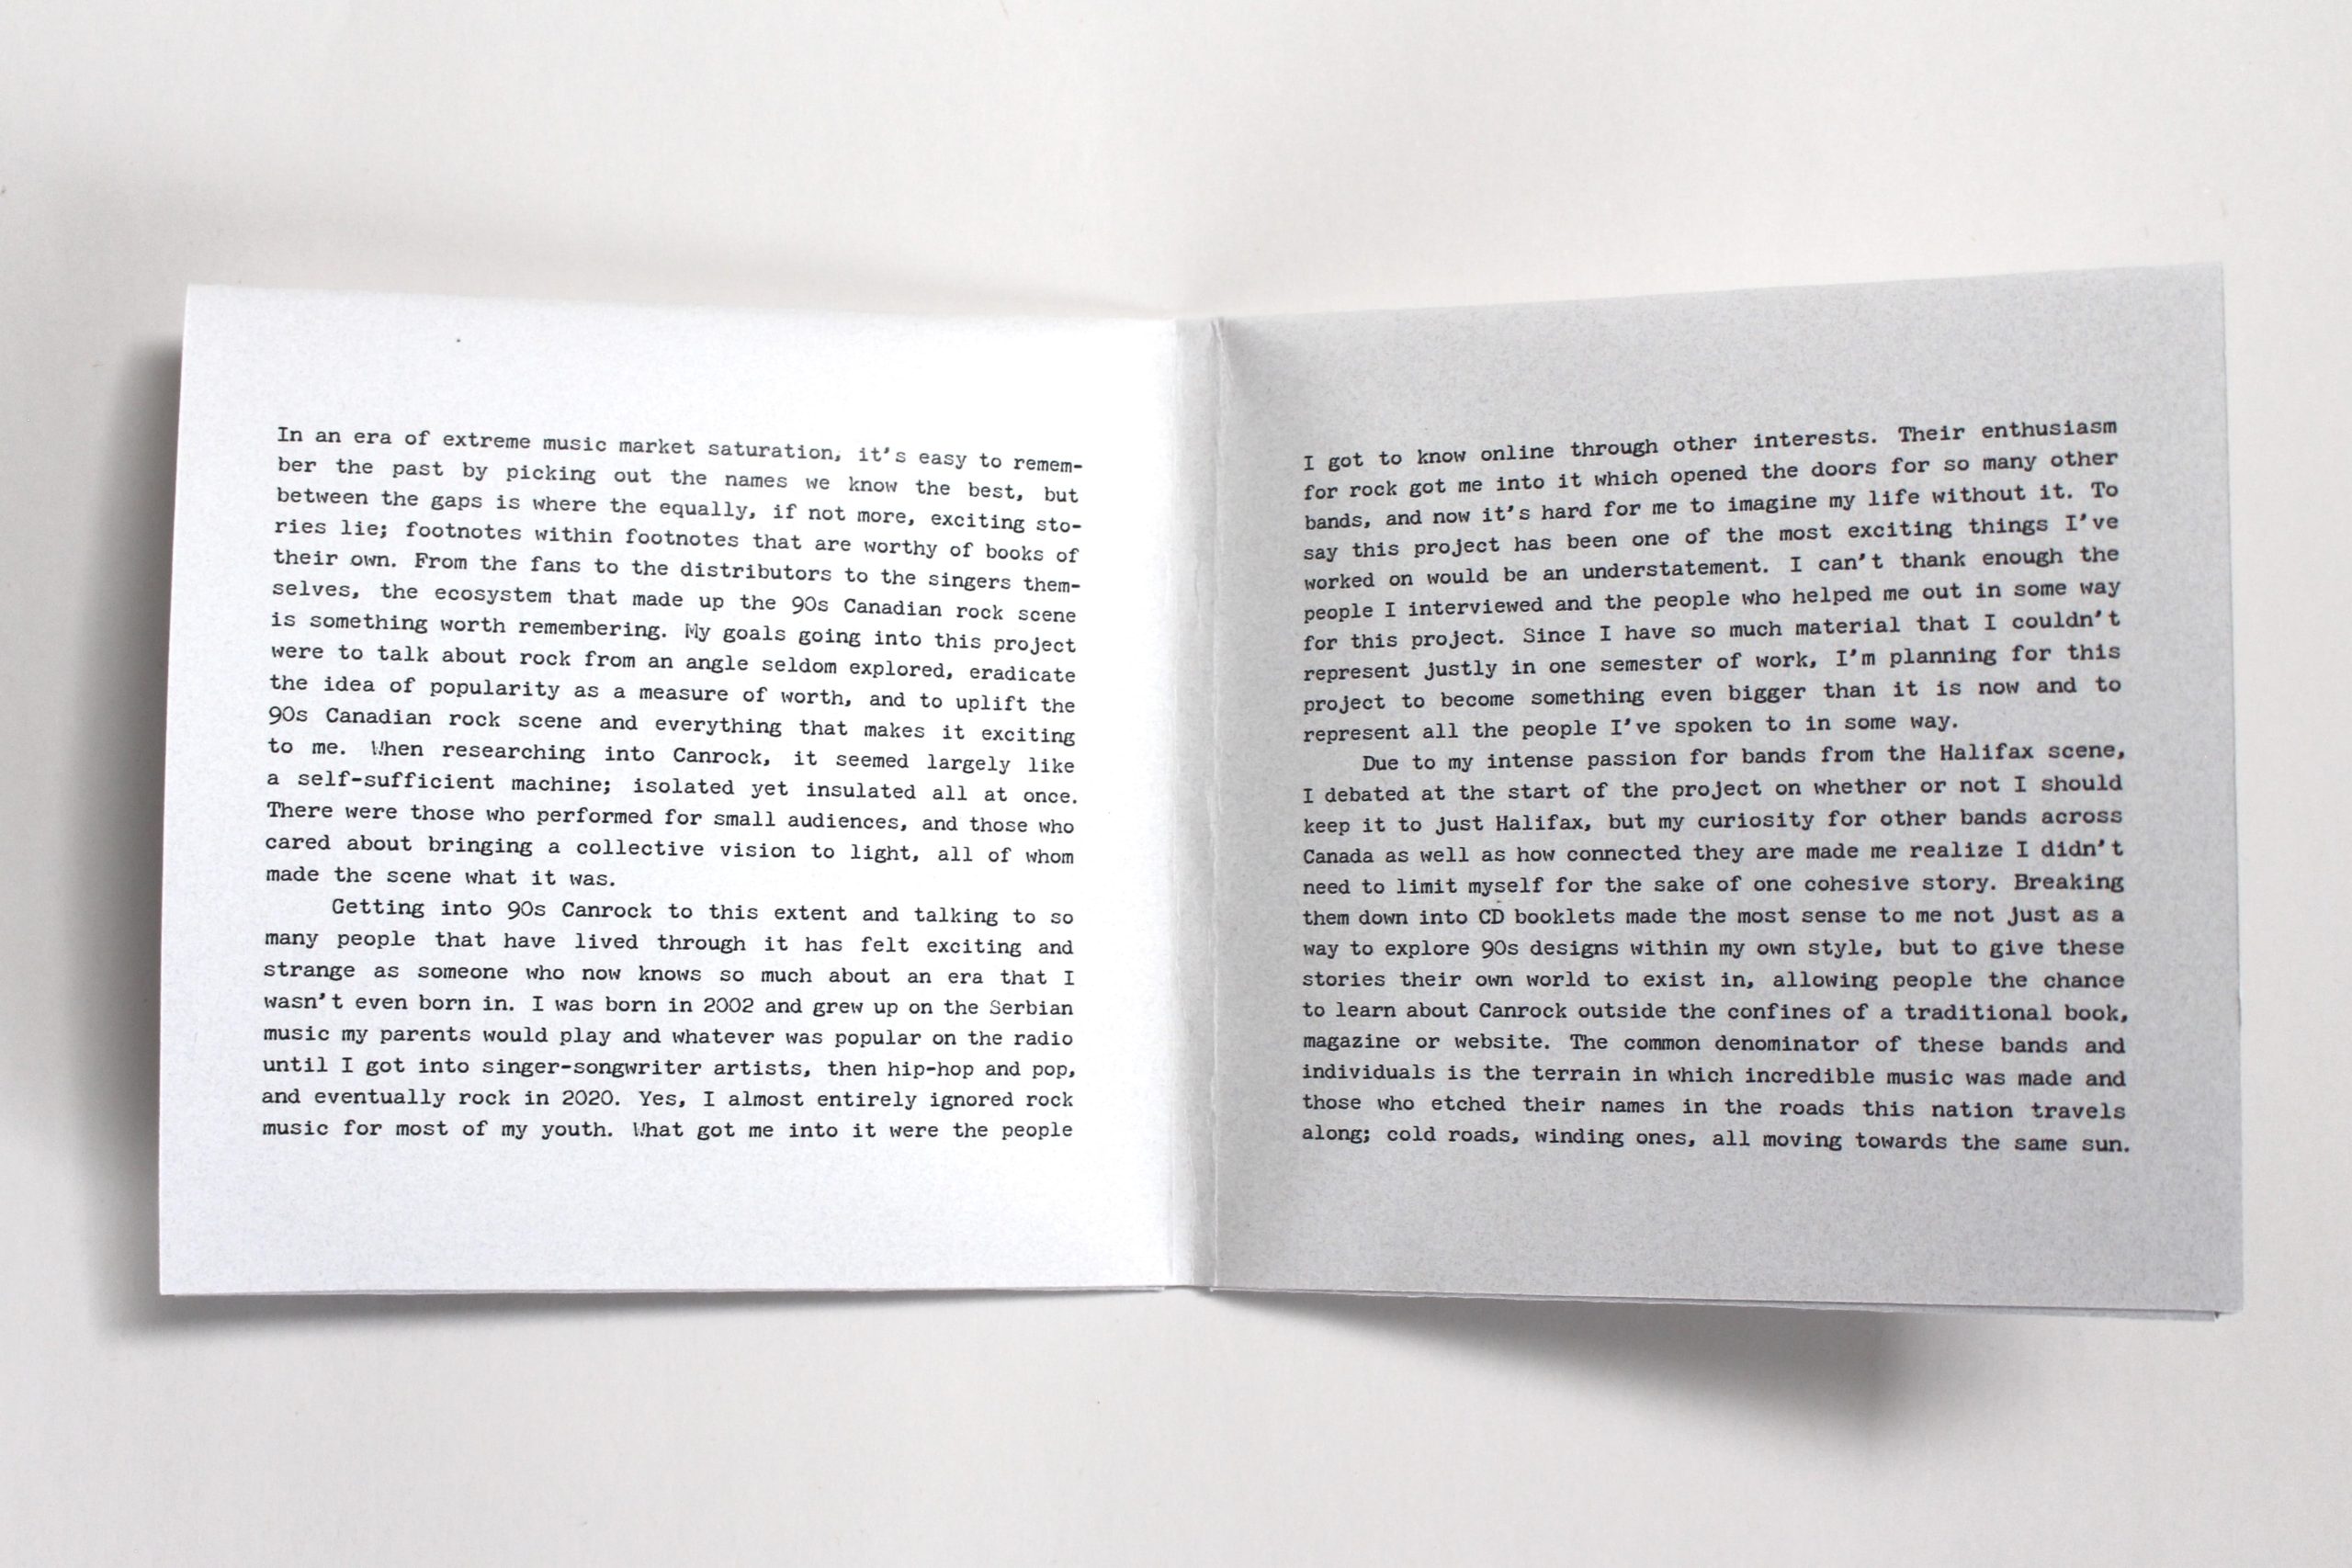 An opened white CD gatefold sleeve with text printed in black on it reading: "In an era of extreme music market saturation, it’s easy to remember the past by picking out the names we know the best, but between the gaps is where the equally, if not more, exciting stories lie; footnotes within footnotes that are worthy of books of their own. From the fans to the distributors to the singers themselves, the ecosystem that made up the 90s Canadian rock scene is something worth remembering. My goals going into this project were to talk about rock from an angle seldom explored, eradicate the idea of popularity as a measure of worth, and to uplift the 90s Canadian rock scene and everything that makes it exciting to me. When researching into Canrock, it seemed largely like a self-sufficient machine; isolated yet insulated all at once. There were those who performed for small audiences, and those who cared about bringing a collective vision to light, all of whom made the scene what it was. 
Getting into 90s Canrock to this extent and talking to so many people that have lived through it has felt exciting and strange as someone who now knows so much about an era that I wasn’t even born in. I was born in 2002 and grew up on the Serbian music my parents would play and whatever was popular on the radio until I got into singer-songwriter artists, then hip-hop and pop, and eventually rock in 2020. Yes, I almost entirely ignored rock music for most of my youth. What got me into it were the people I got to know online through other interests. Their enthusiasm for rock got me into it which opened the doors for so many other bands, and now it’s hard for me to imagine my life without it. To say this project has been one of the most exciting things I’ve worked on would be an understatement. I can’t thank enough the people I interviewed and the people who helped me out in some way for this project. Since I have so much material that I couldn’t represent justly in one semester of work, I’m planning for this project to become something even bigger than it is now and to represent all the people I’ve spoken to in some way. 
Due to my intense passion for bands from the Halifax scene, I debated at the start of the project on whether or not I should keep it to just Halifax, but my curiosity for other bands across Canada as well as how connected they are made me realize I didn’t need to limit myself for the sake of one cohesive story. Breaking them down into CD booklets made the most sense to me not just as a way to explore 90s designs within my own style, but to give these stories their own world to exist in, allowing people the chance to learn about Canrock outside the confines of a traditional book, magazine or website. The common denominator of these bands and individuals is the terrain in which incredible music was made and those who etched their names in the roads this nation travels along; cold roads, winding ones, all moving towards the same sun."